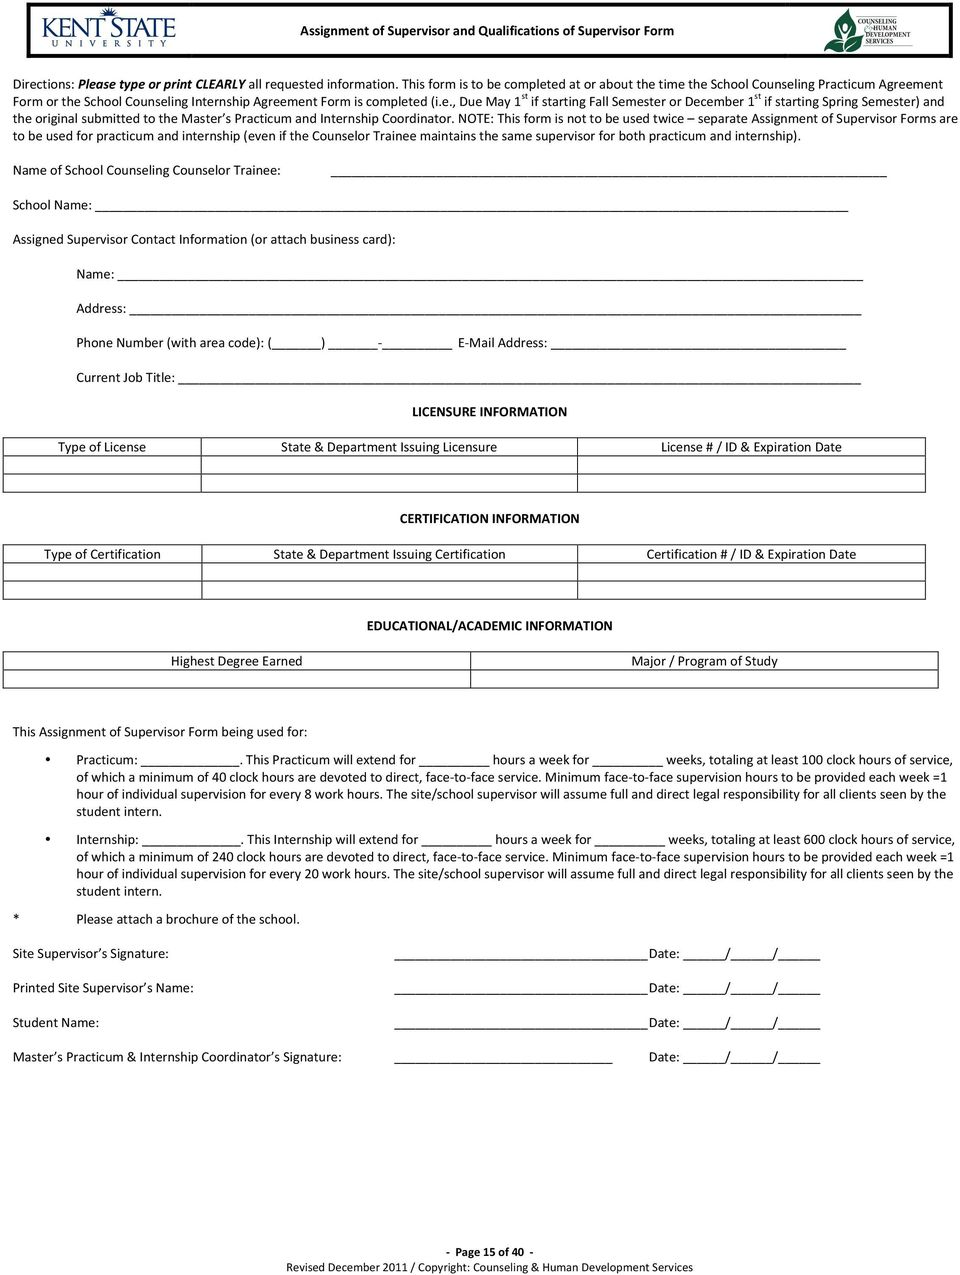 NOTE: This form is not to be used twice separate Assignment of Supervisor Forms are to be used for practicum and internship (even if the Counselor Trainee maintains the same supervisor for both